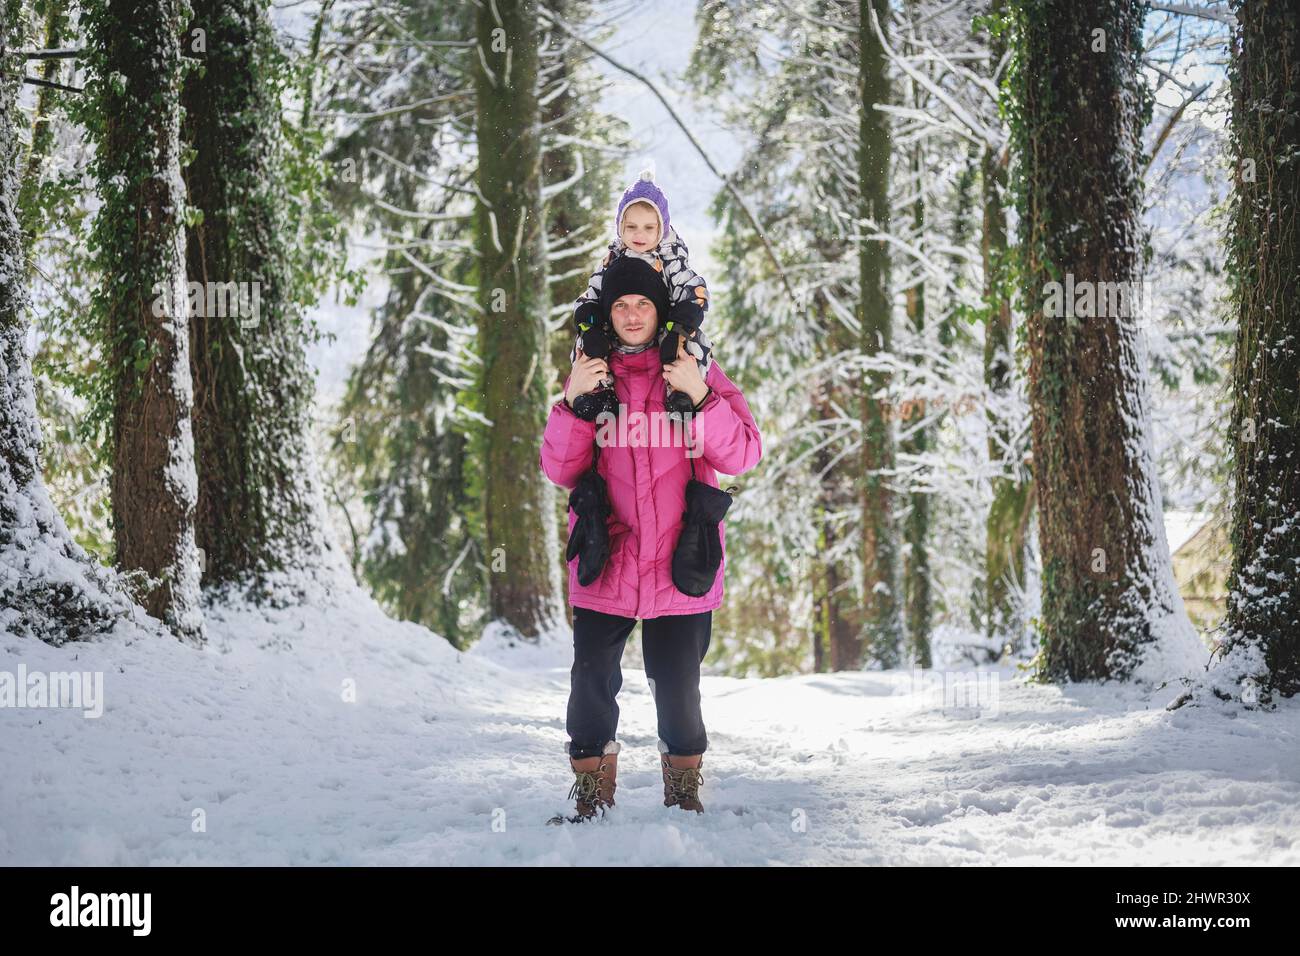 Father carrying daughter on shoulders in pine forest Stock Photo